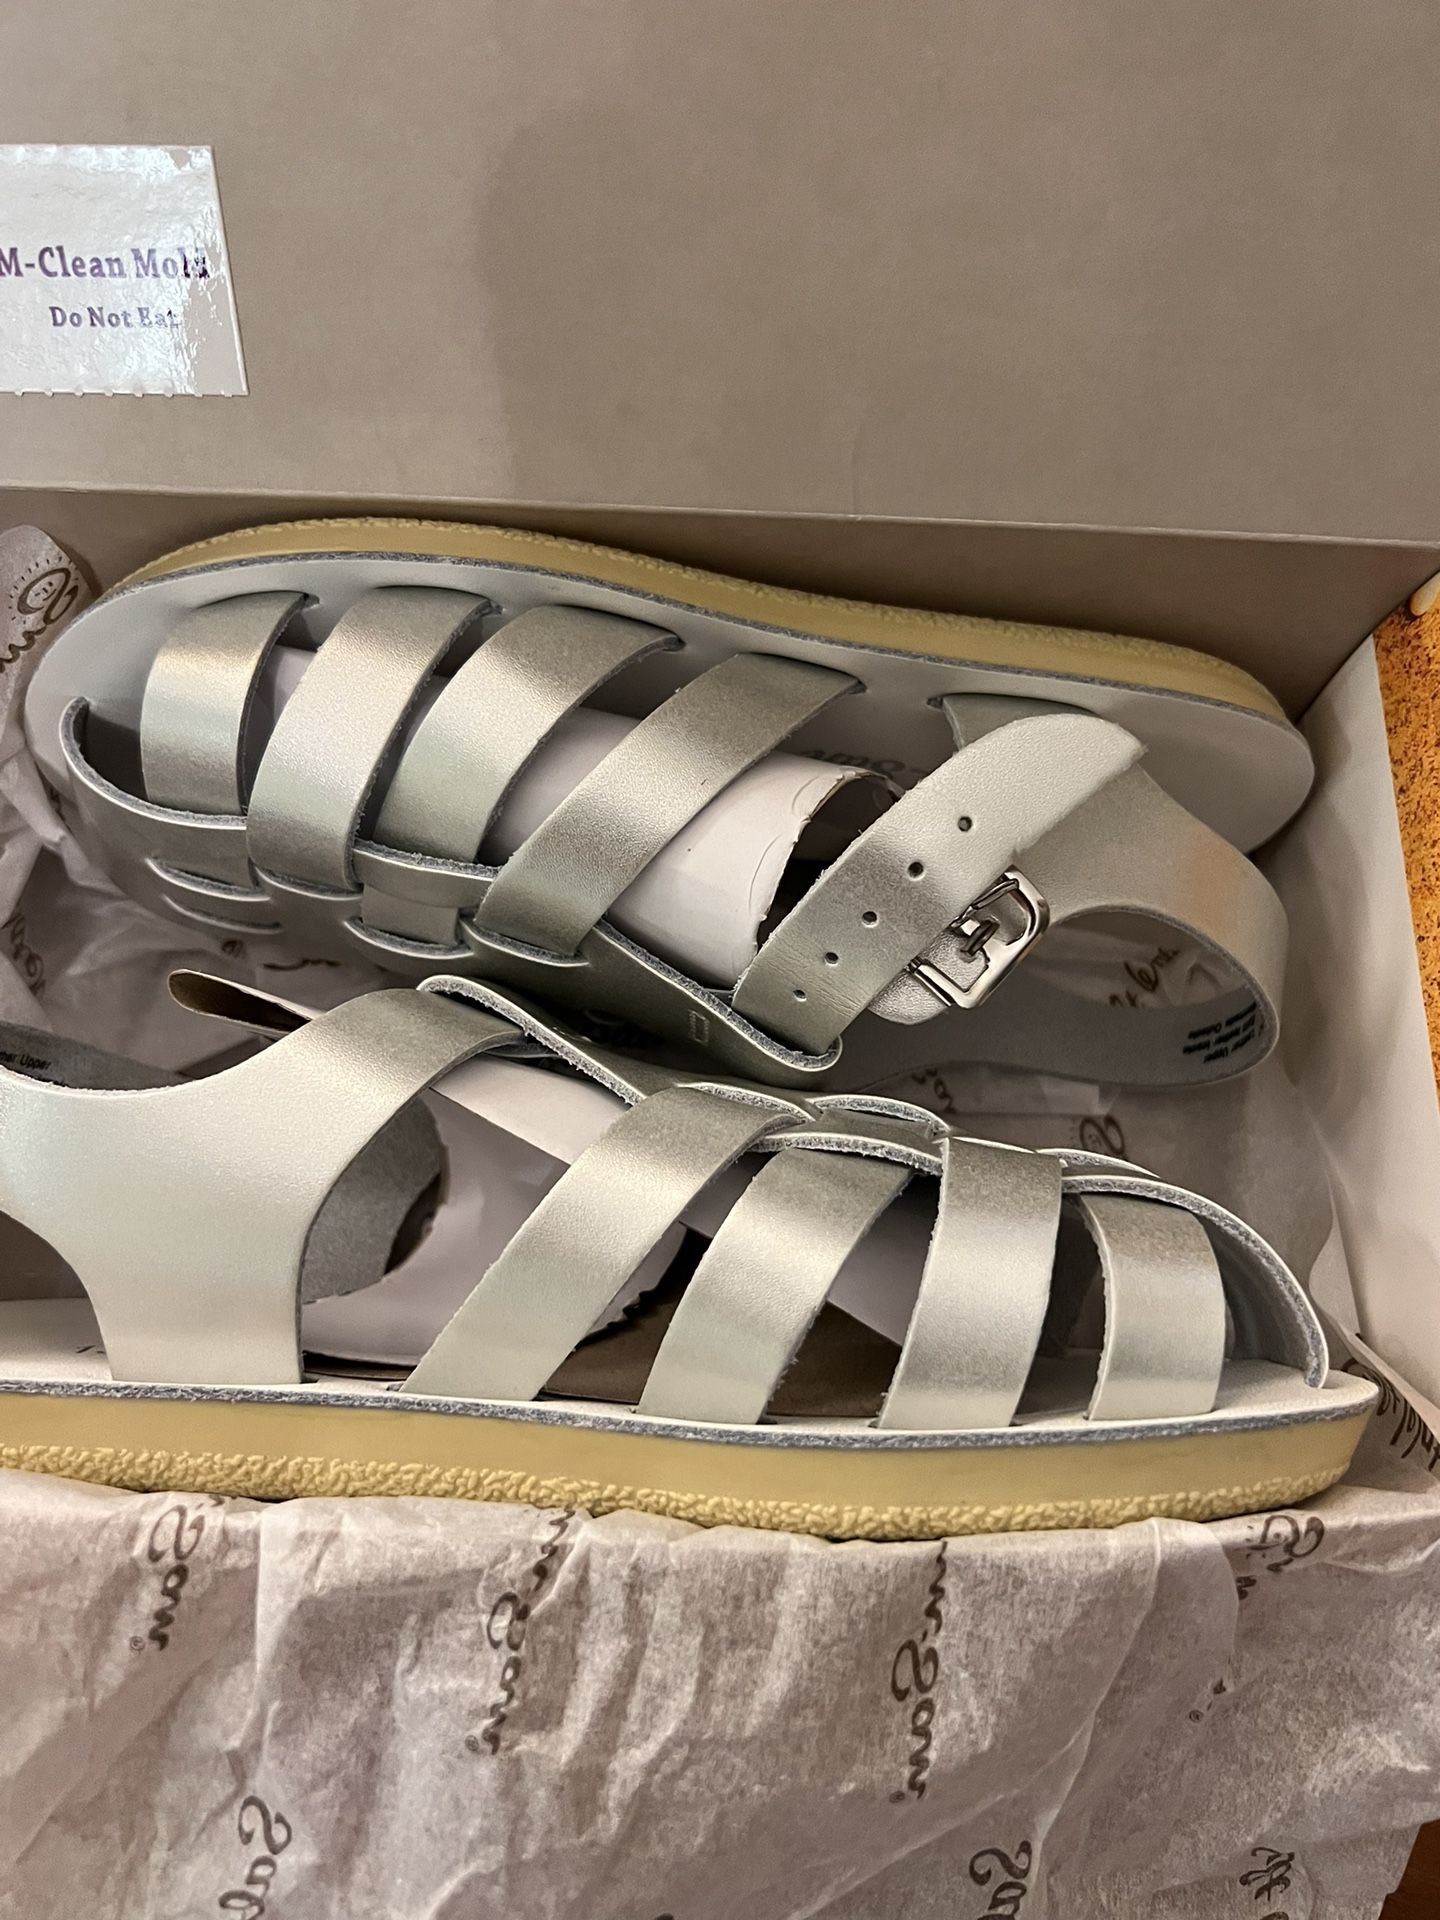 Salt Water Sandals Little Kids Size 13 NEW for Sale in Tustin, CA - OfferUp